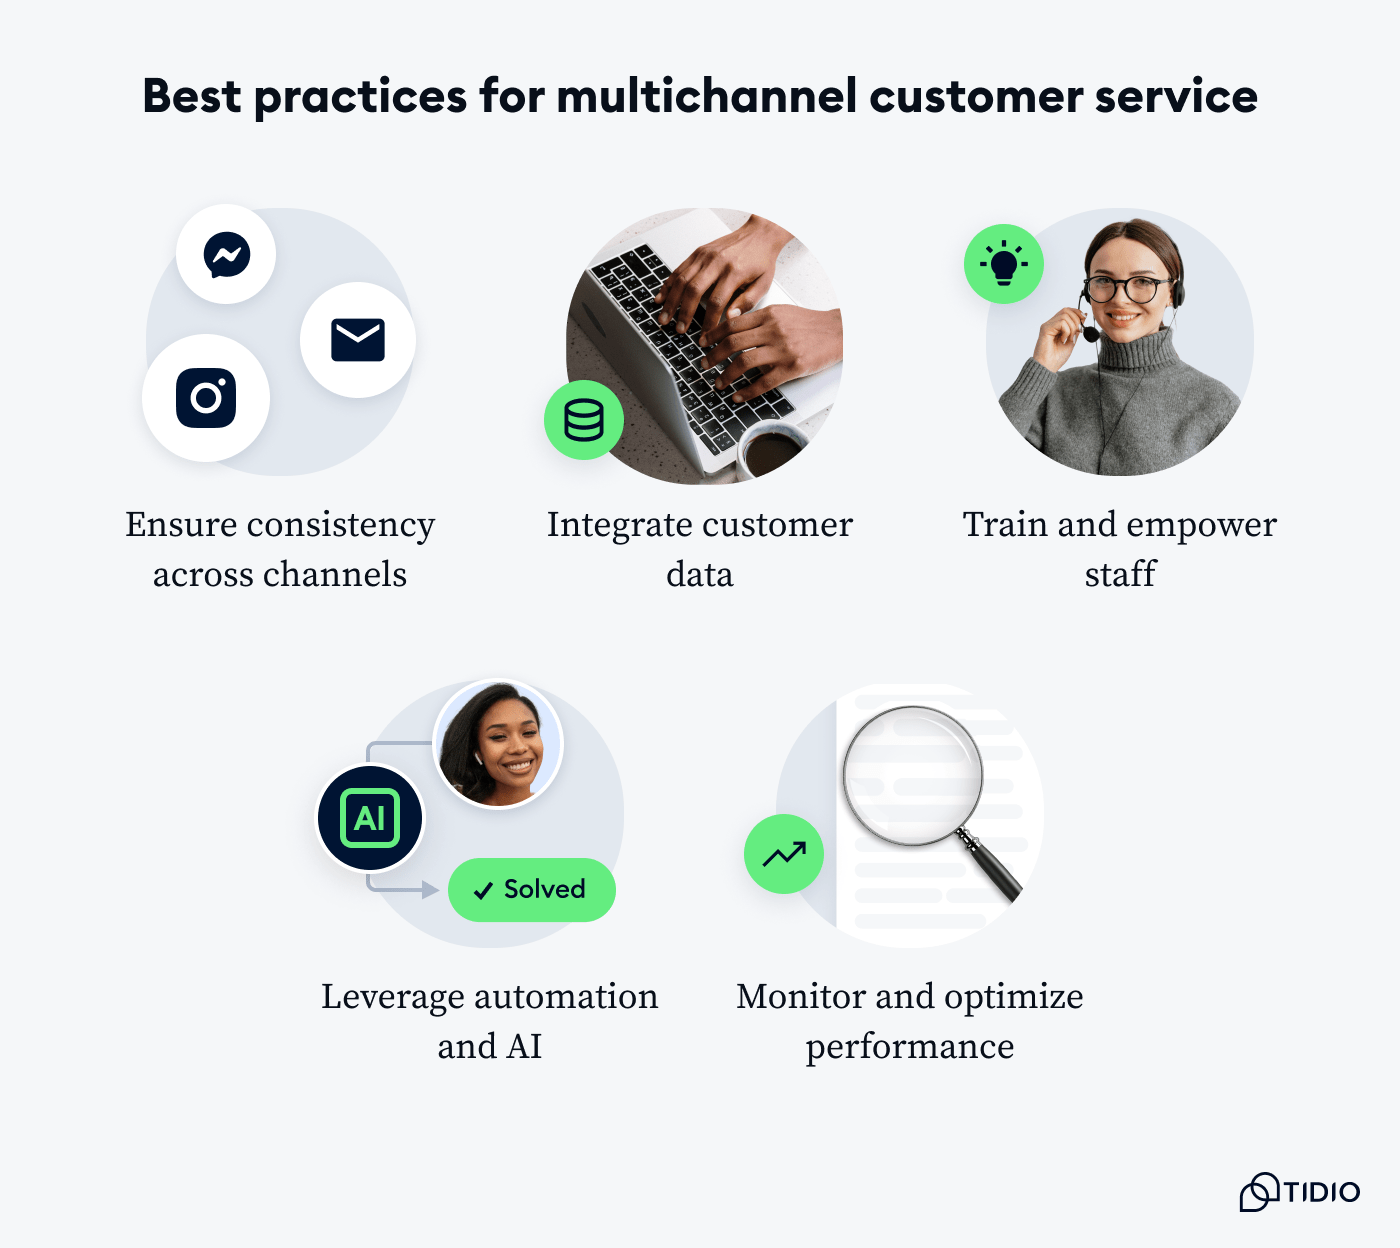 Best practices for multichannel customer service